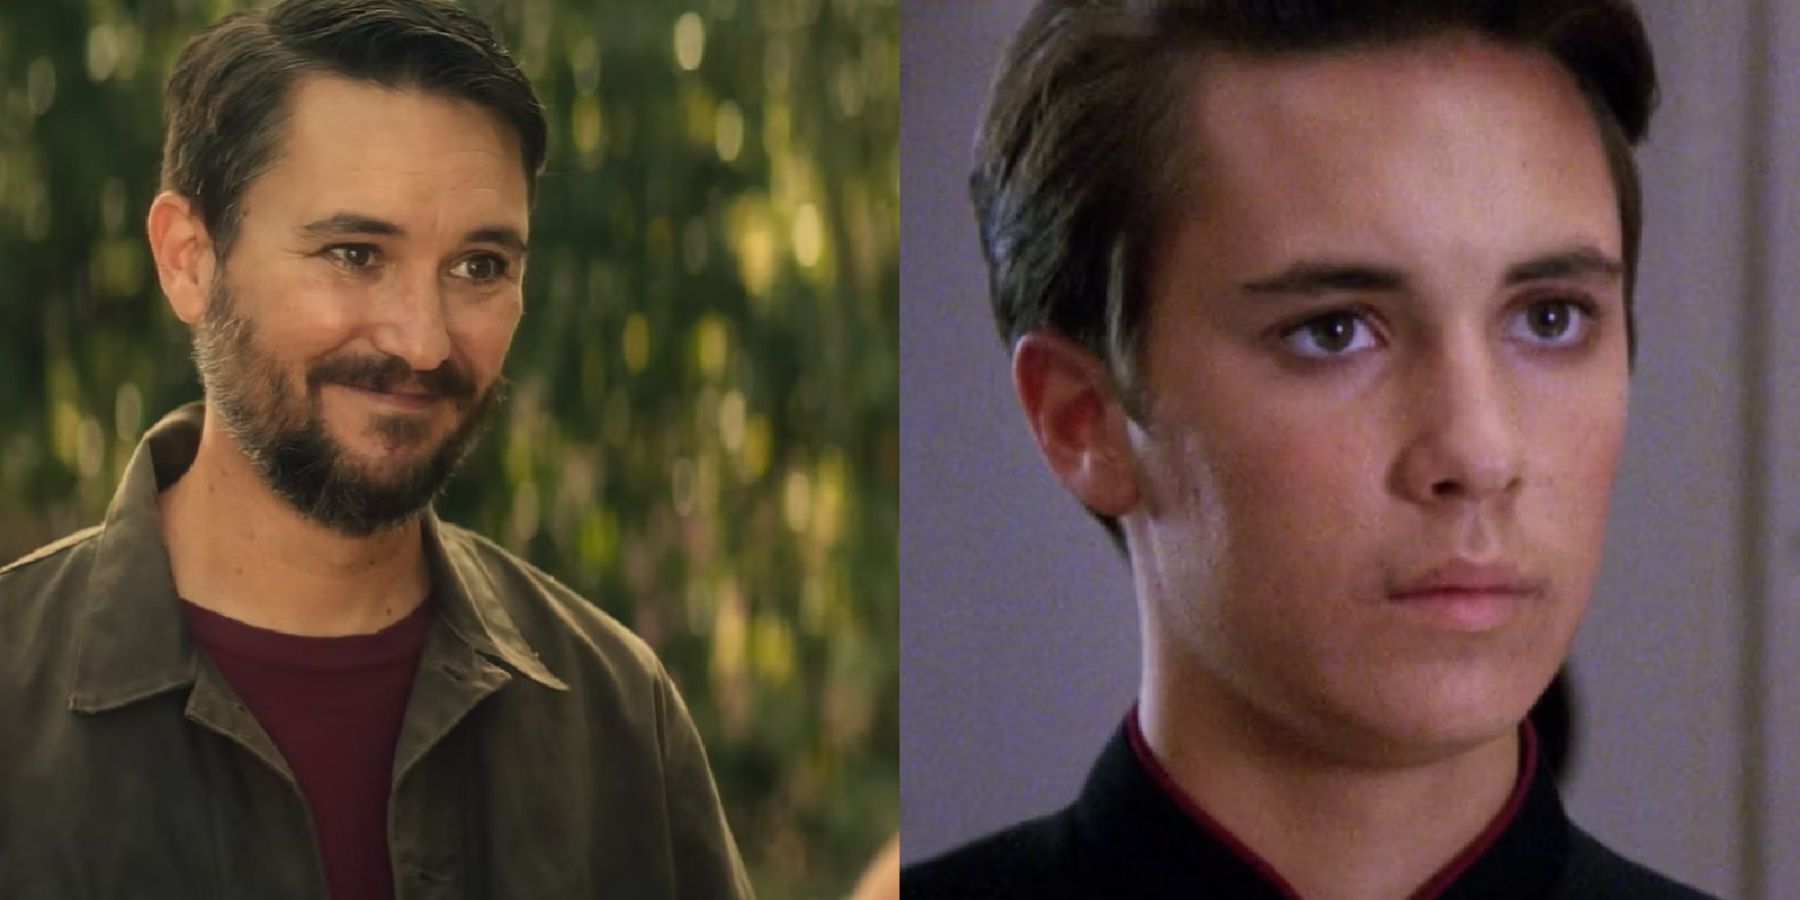 Wil Wheaton as Wesley Crusher